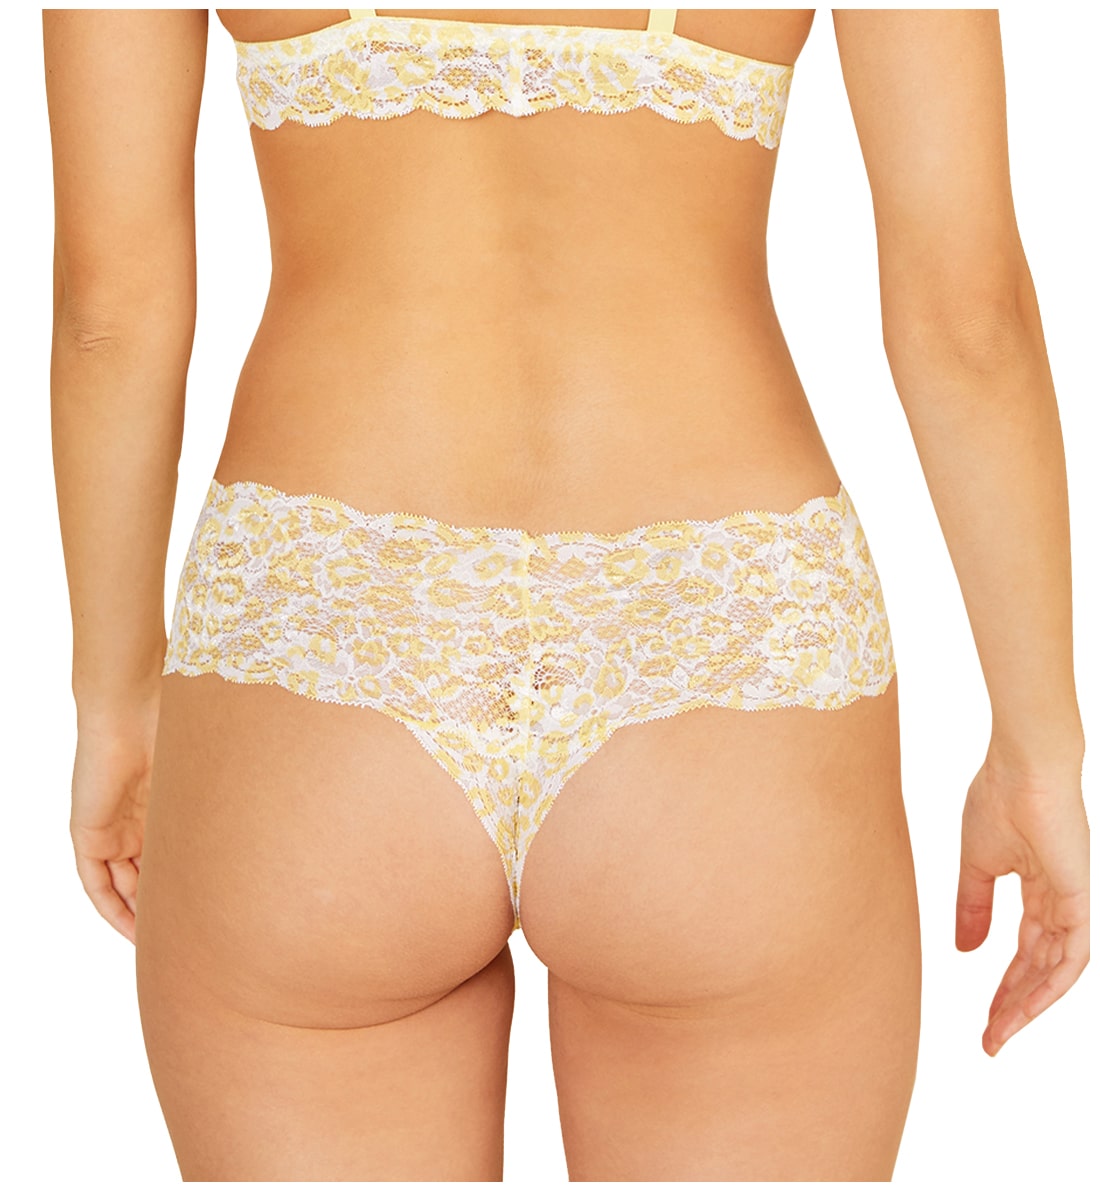 Cosabella Never Say Never Printed Comfie Thong (NEVEP0343),S/M,Animal Limone - Animal Limone,S/M